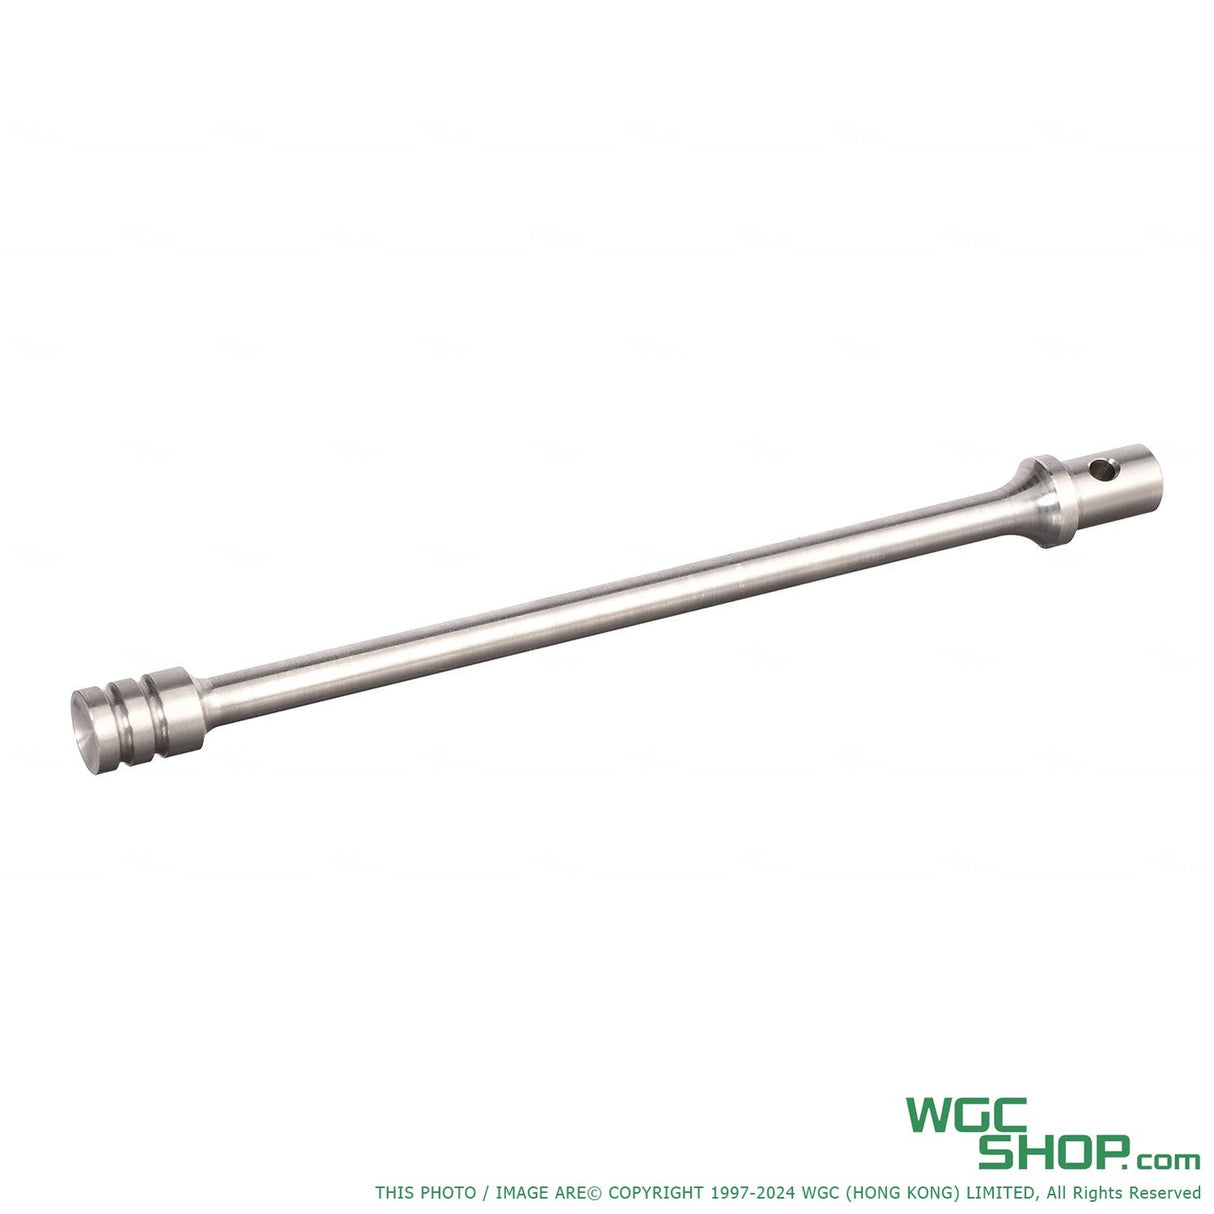 DRAGON WORKSHOP 303 Stainless Steel Recoil Rod for Marui AKM GBB Airsoft